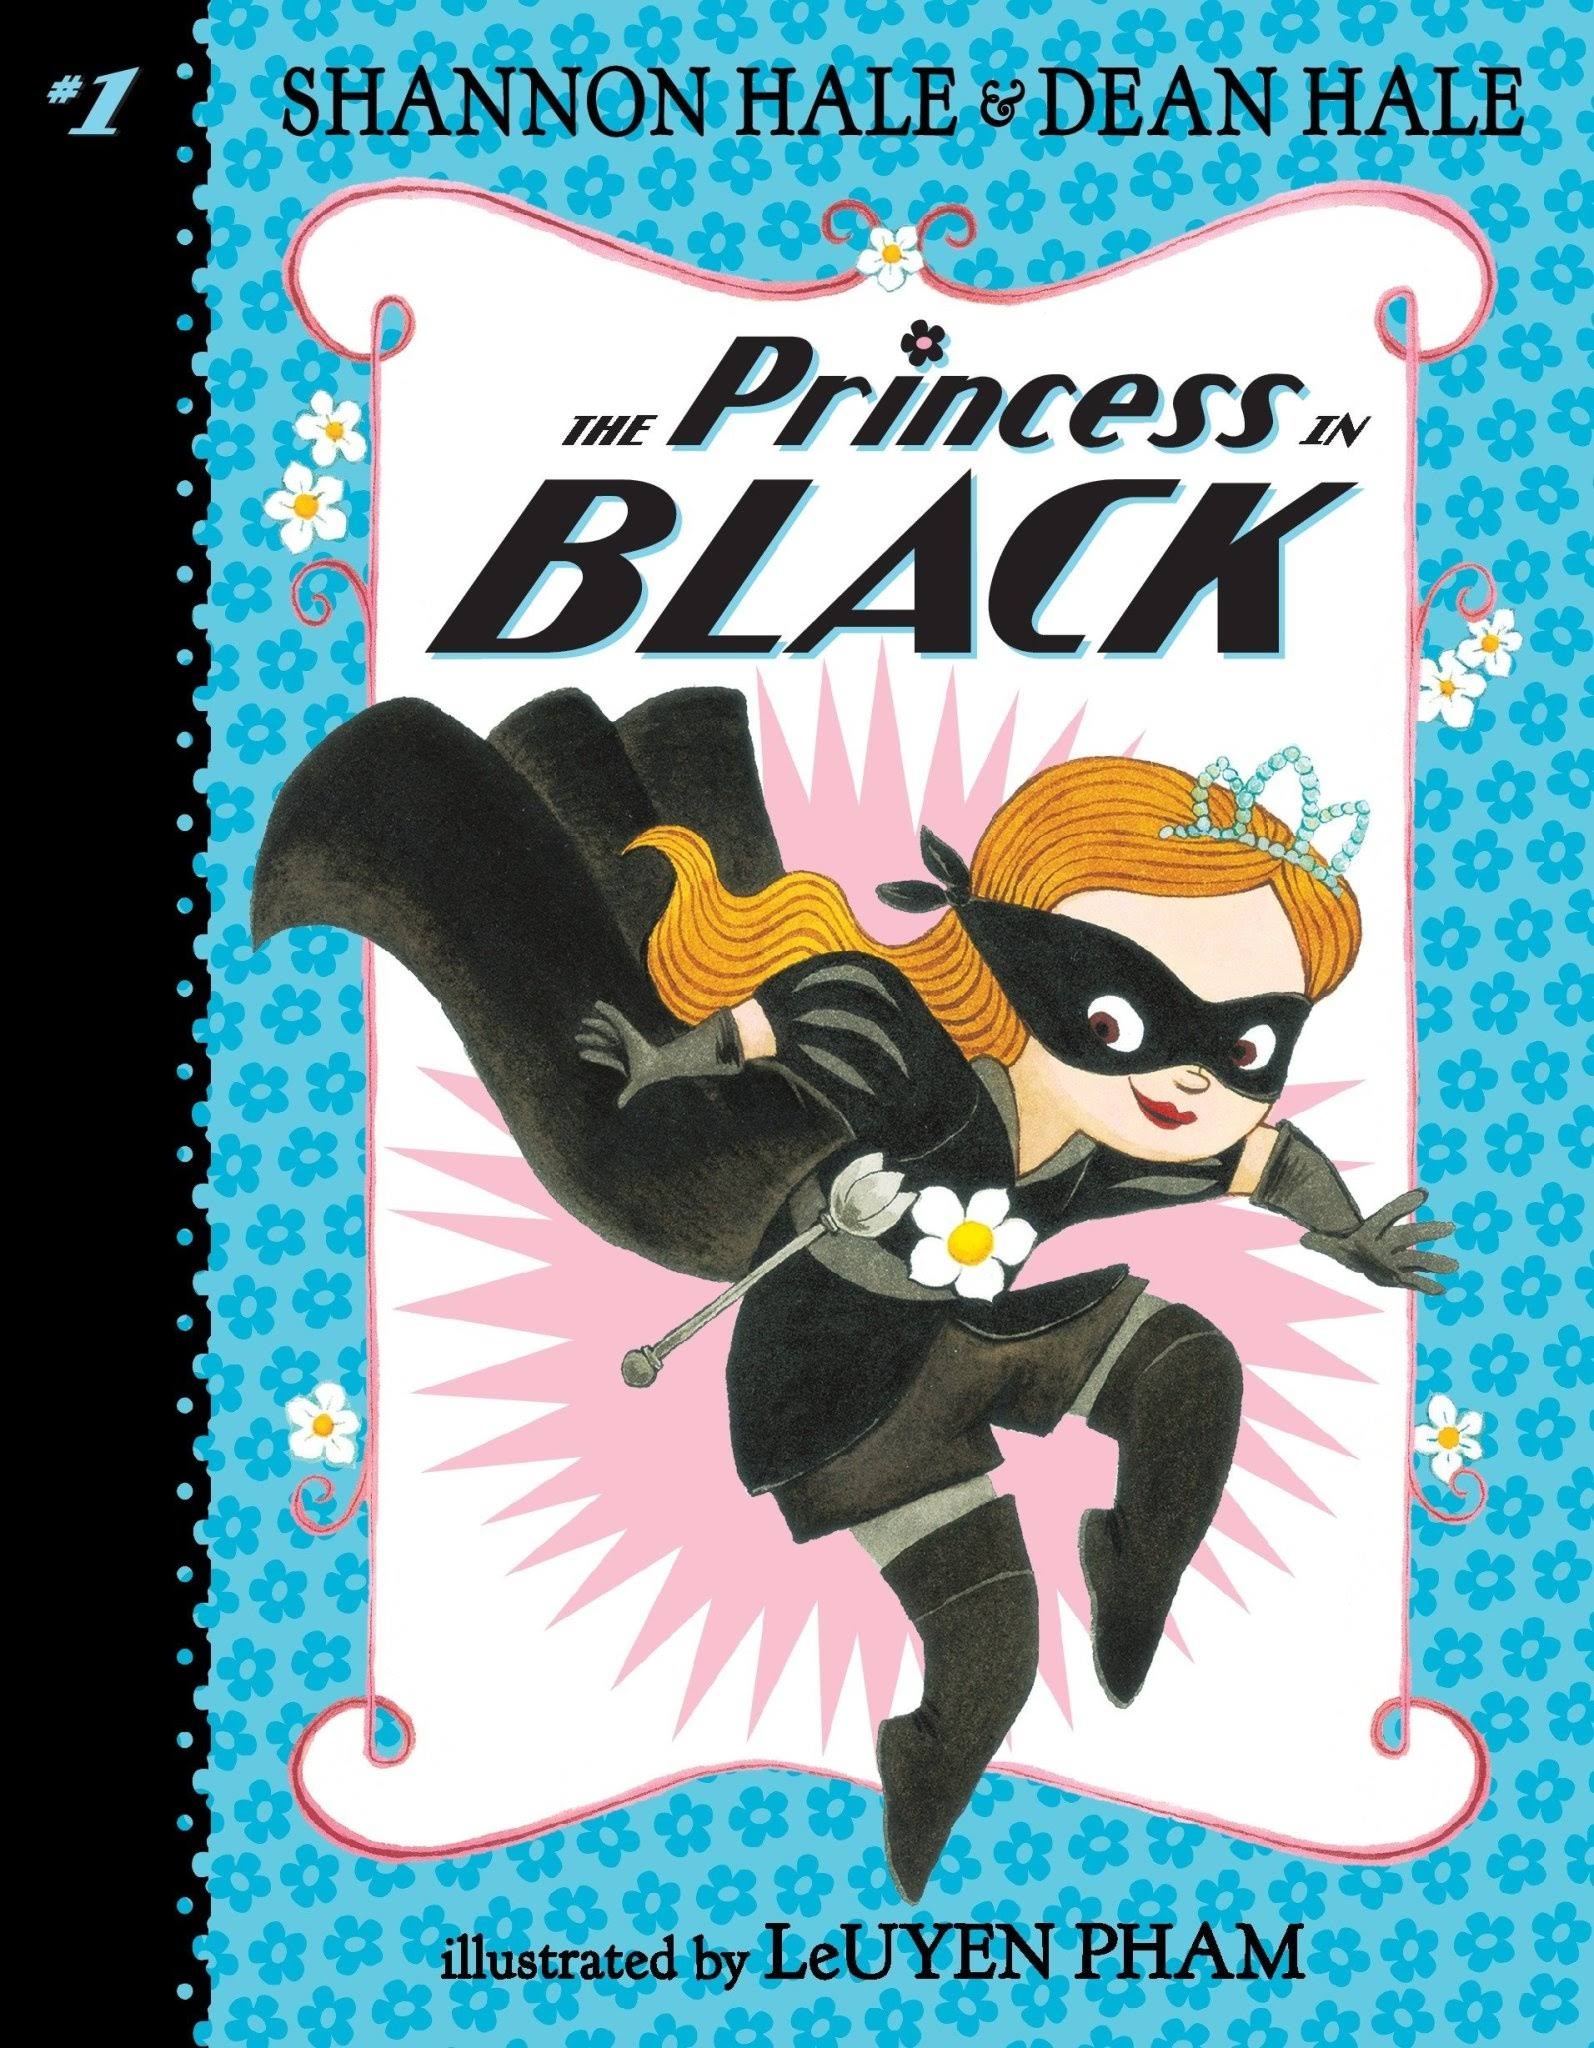 The Princess in Black - Shannon Hale and Dean Hale 